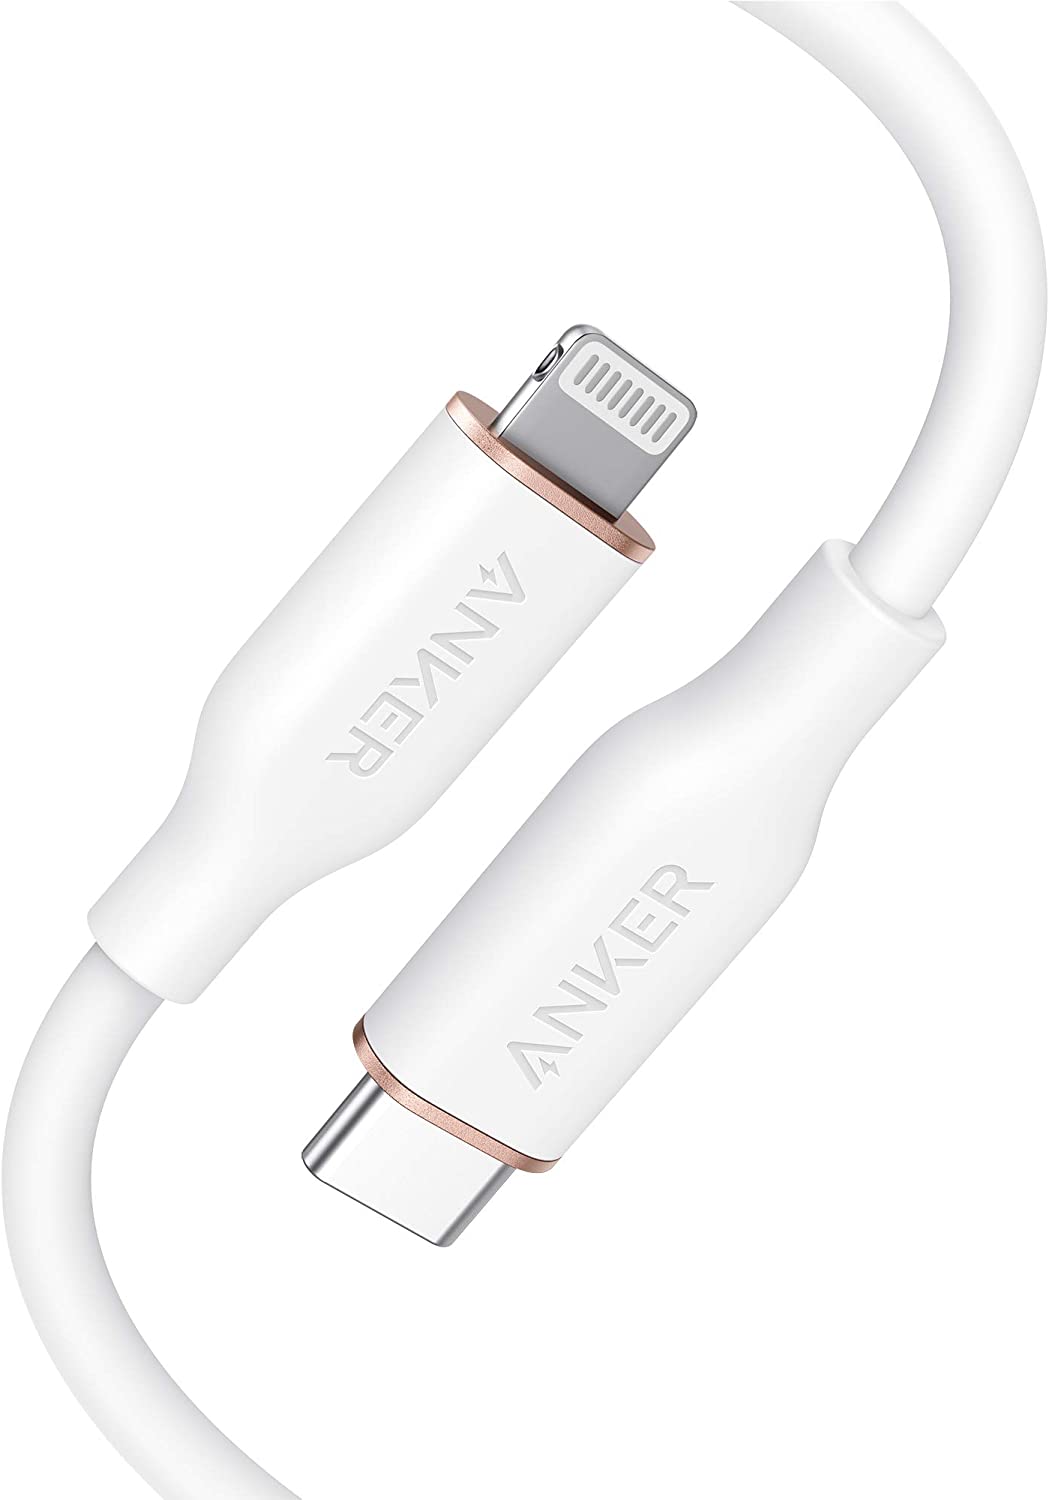 Anker Powerline Iii Flow Usb-C To Lightning Cable 0.9M White